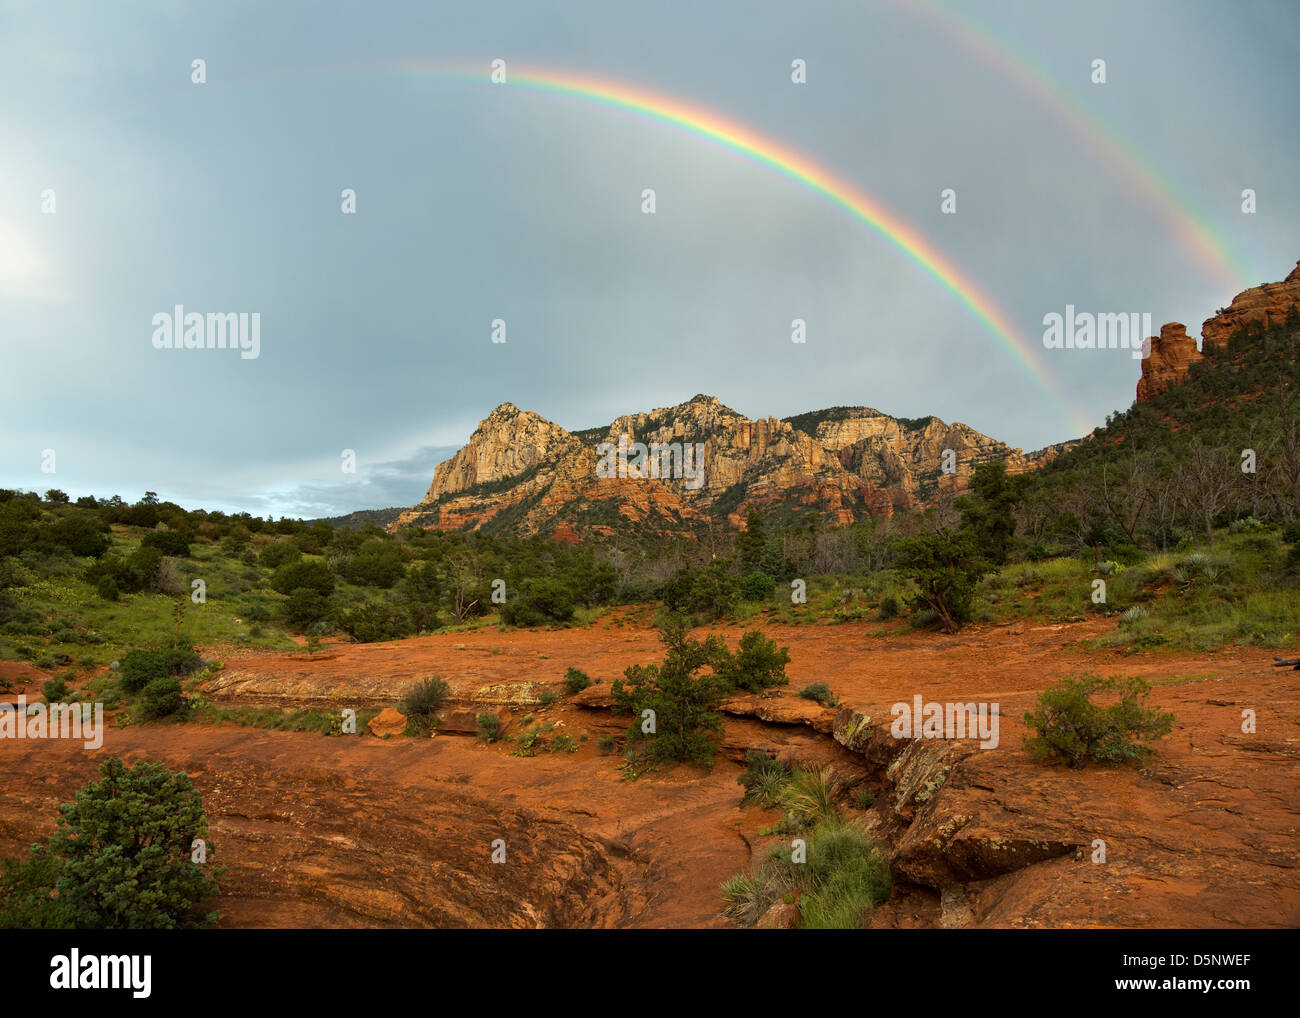 Double rainbow arching over mountains of Sedona at sunset Stock Photo